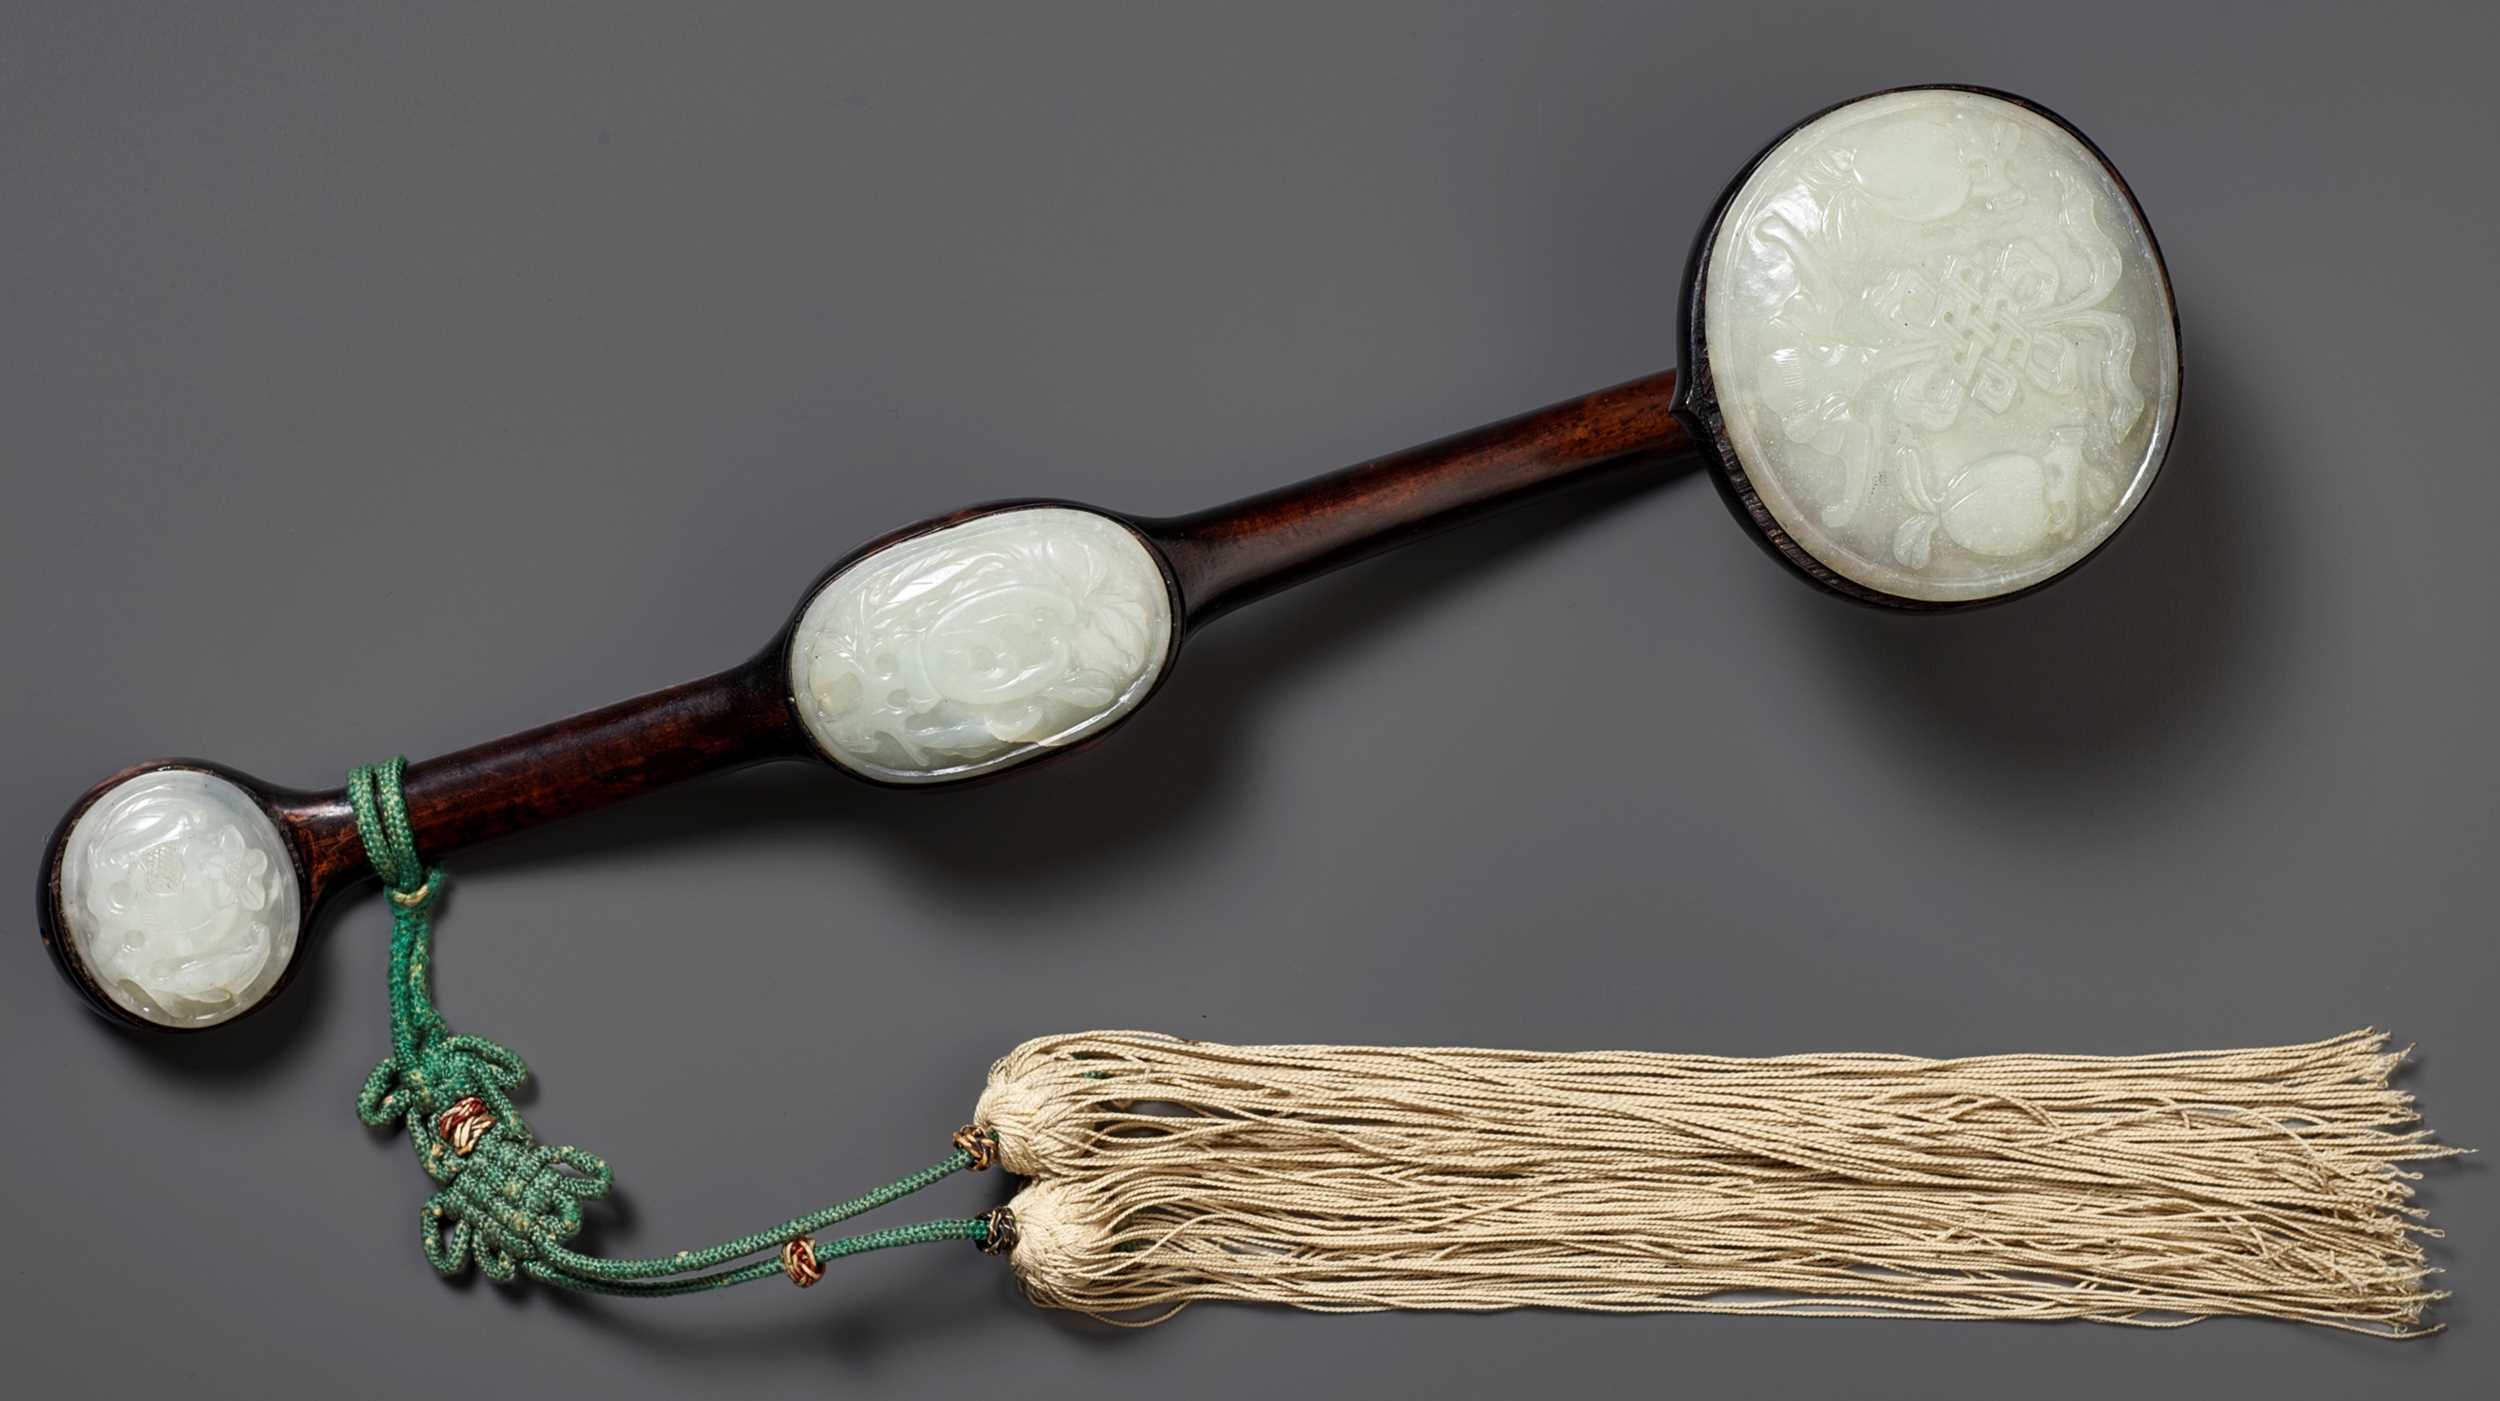 A PALE CELADON JADE-MOUNTED WOOD RUYI SCEPTER, QING DYNASTY